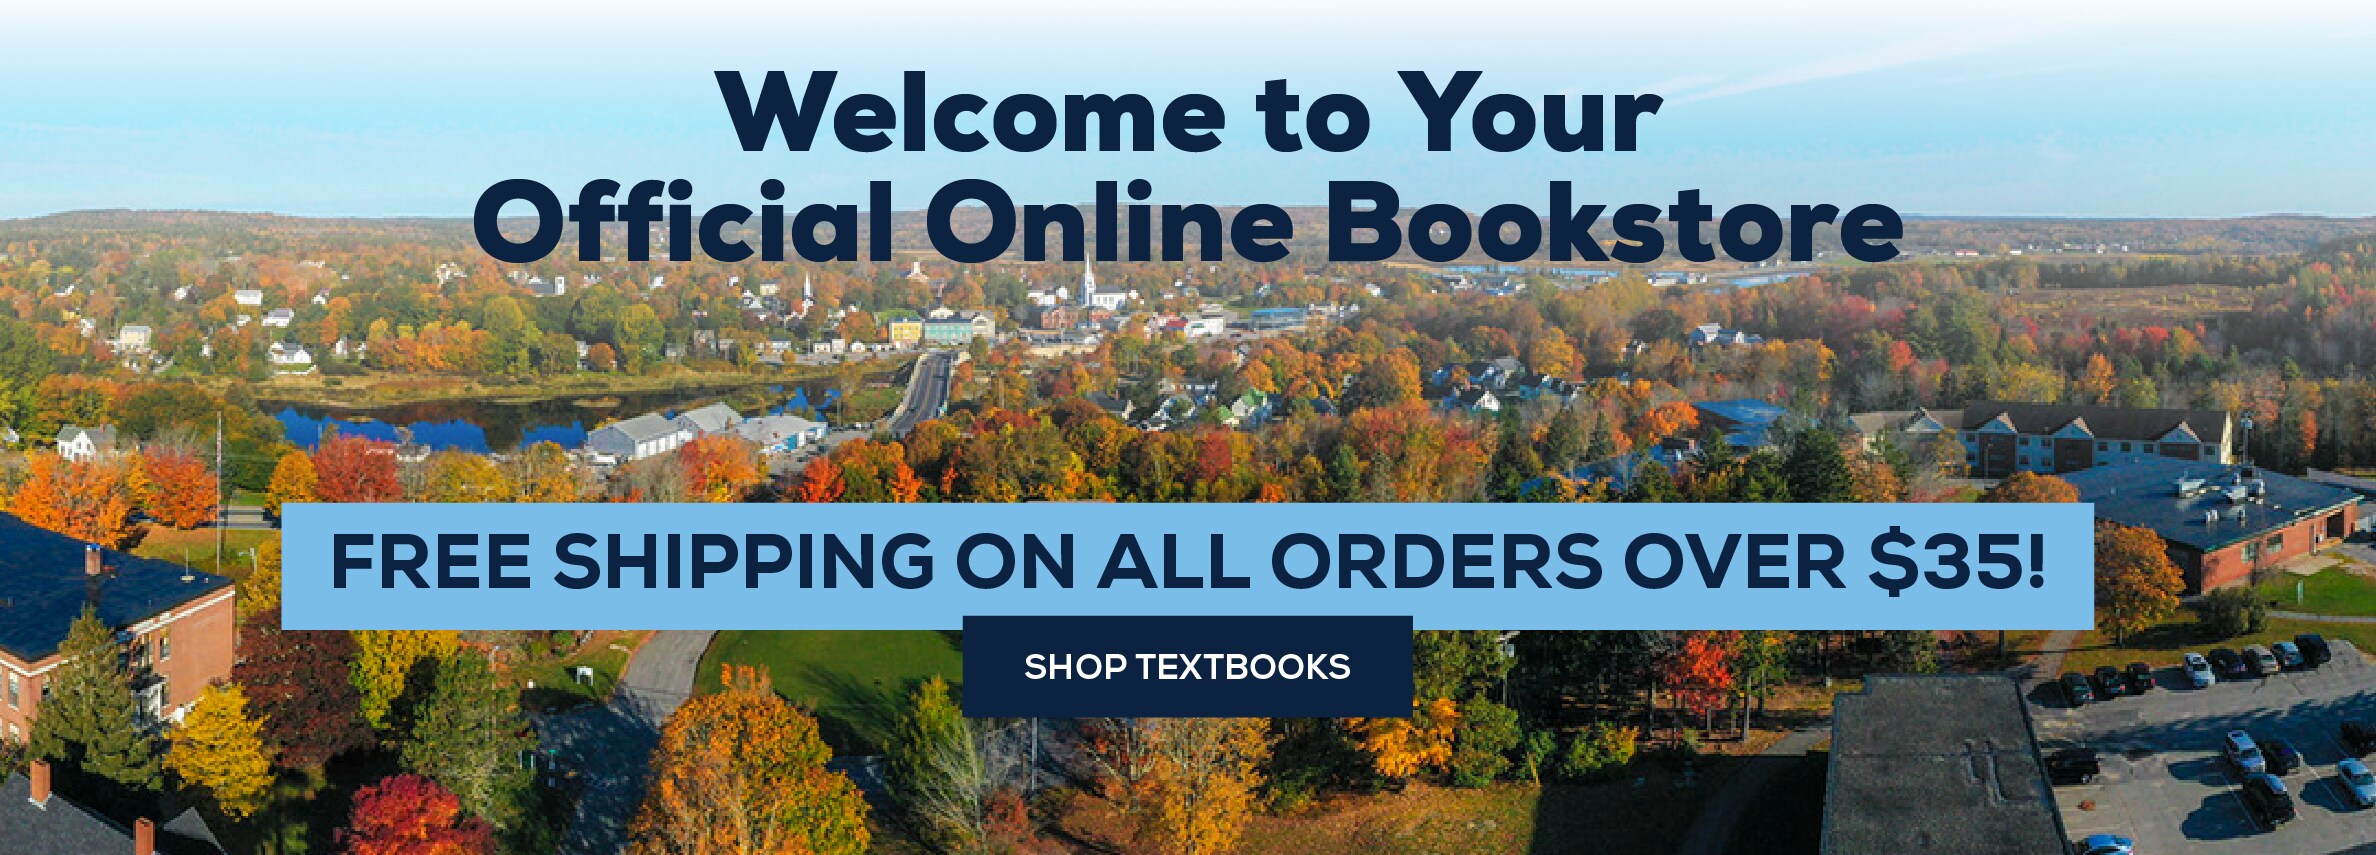 Welcome to your official online bookstore. Free shipping on all orders over $35! Shop textbooks